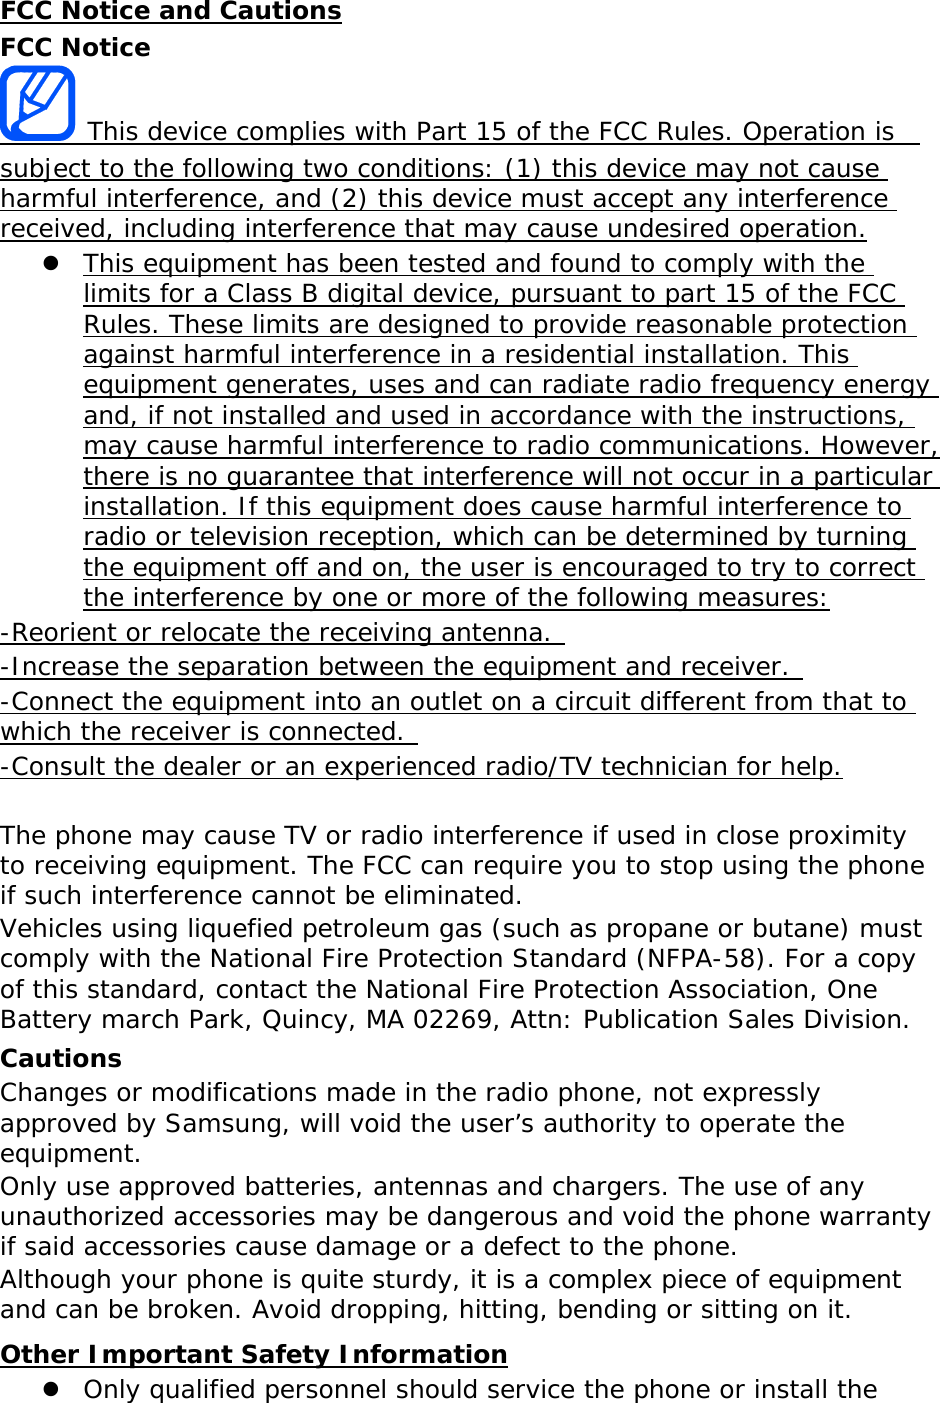 UFCC Notice and Cautions FCC Notice U This device complies with Part 15 of the FCC Rules. Operation is  subject to the following two conditions: (1) this device may not cause harmful interference, and (2) this device must accept any interference received, including interference that may cause undesired operation.  UThis equipment has been tested and found to comply with the limits for a Class B digital device, pursuant to part 15 of the FCC Rules. These limits are designed to provide reasonable protection against harmful interference in a residential installation. This equipment generates, uses and can radiate radio frequency energy and, if not installed and used in accordance with the instructions, may cause harmful interference to radio communications. However, there is no guarantee that interference will not occur in a particular installation. If this equipment does cause harmful interference to radio or television reception, which can be determined by turning the equipment off and on, the user is encouraged to try to correct the interference by one or more of the following measures: U-Reorient or relocate the receiving antenna.  U-Increase the separation between the equipment and receiver.  U-Connect the equipment into an outlet on a circuit different from that to which the receiver is connected.  U-Consult the dealer or an experienced radio/TV technician for help.  The phone may cause TV or radio interference if used in close proximity to receiving equipment. The FCC can require you to stop using the phone if such interference cannot be eliminated. Vehicles using liquefied petroleum gas (such as propane or butane) must comply with the National Fire Protection Standard (NFPA-58). For a copy of this standard, contact the National Fire Protection Association, One Battery march Park, Quincy, MA 02269, Attn: Publication Sales Division. Cautions Changes or modifications made in the radio phone, not expressly approved by Samsung, will void the user’s authority to operate the equipment. Only use approved batteries, antennas and chargers. The use of any unauthorized accessories may be dangerous and void the phone warranty if said accessories cause damage or a defect to the phone. Although your phone is quite sturdy, it is a complex piece of equipment and can be broken. Avoid dropping, hitting, bending or sitting on it. UOther Important Safety Information  Only qualified personnel should service the phone or install the 